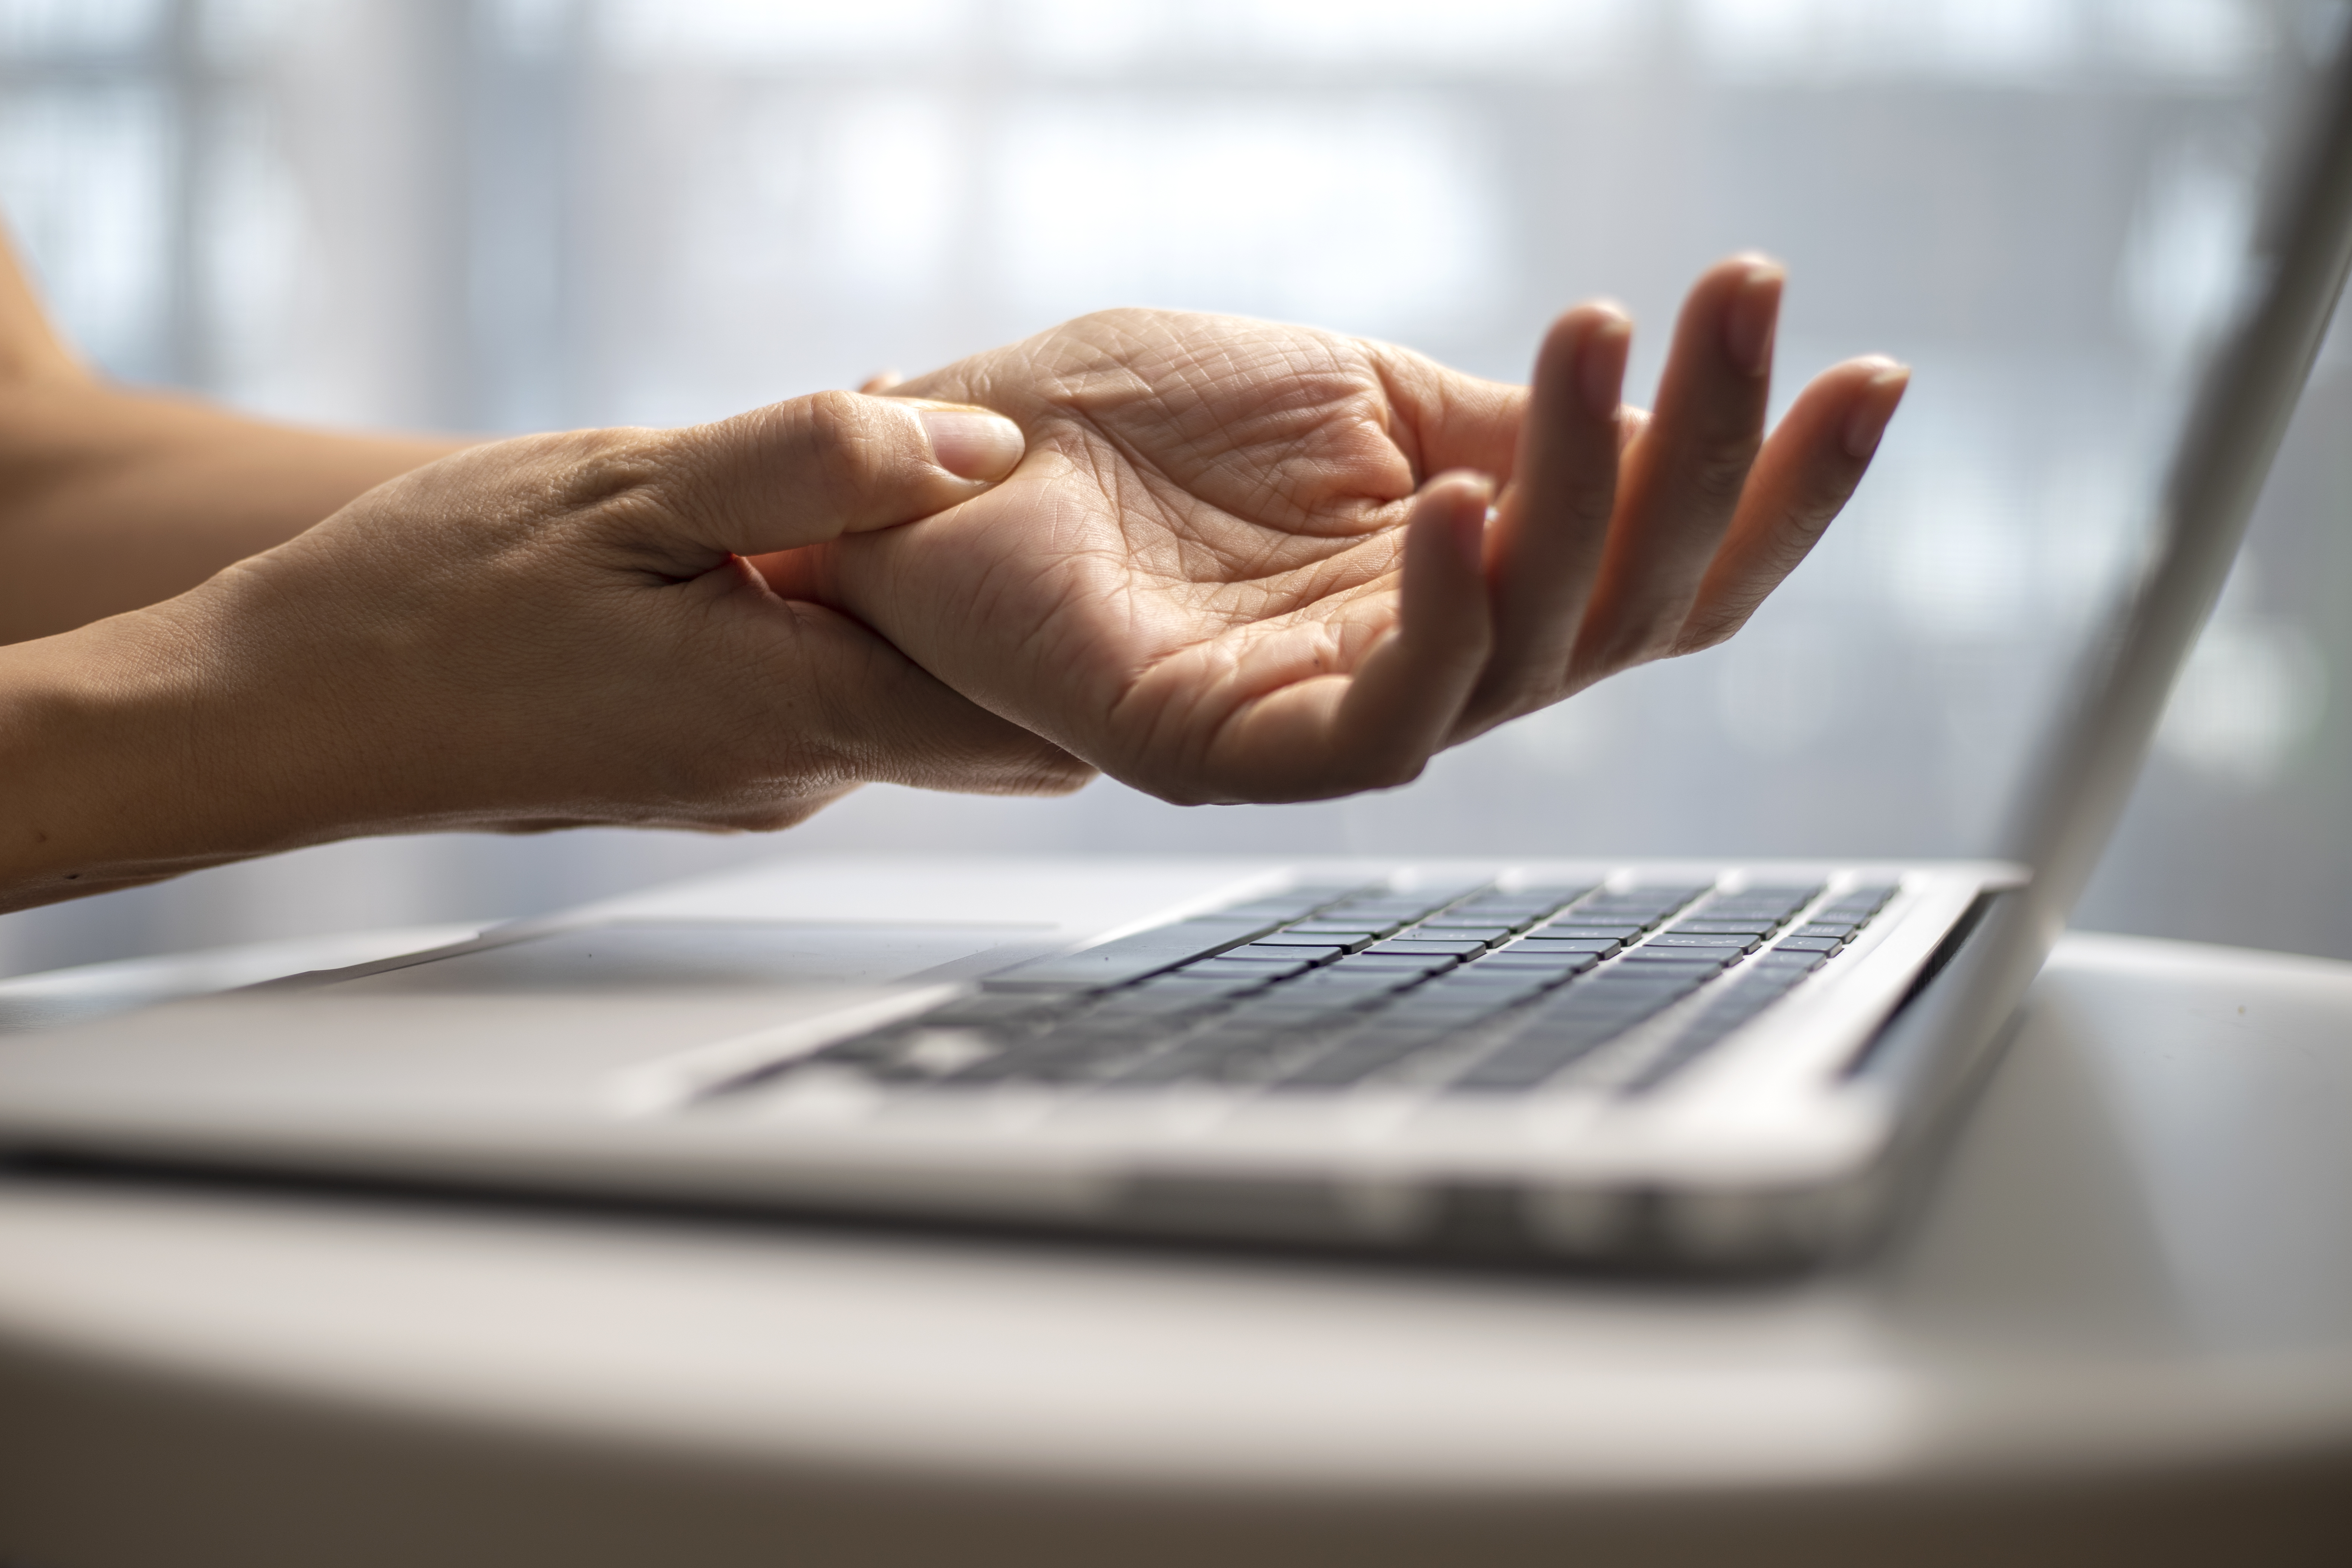 Carpal Tunnel Syndrome, South Florida